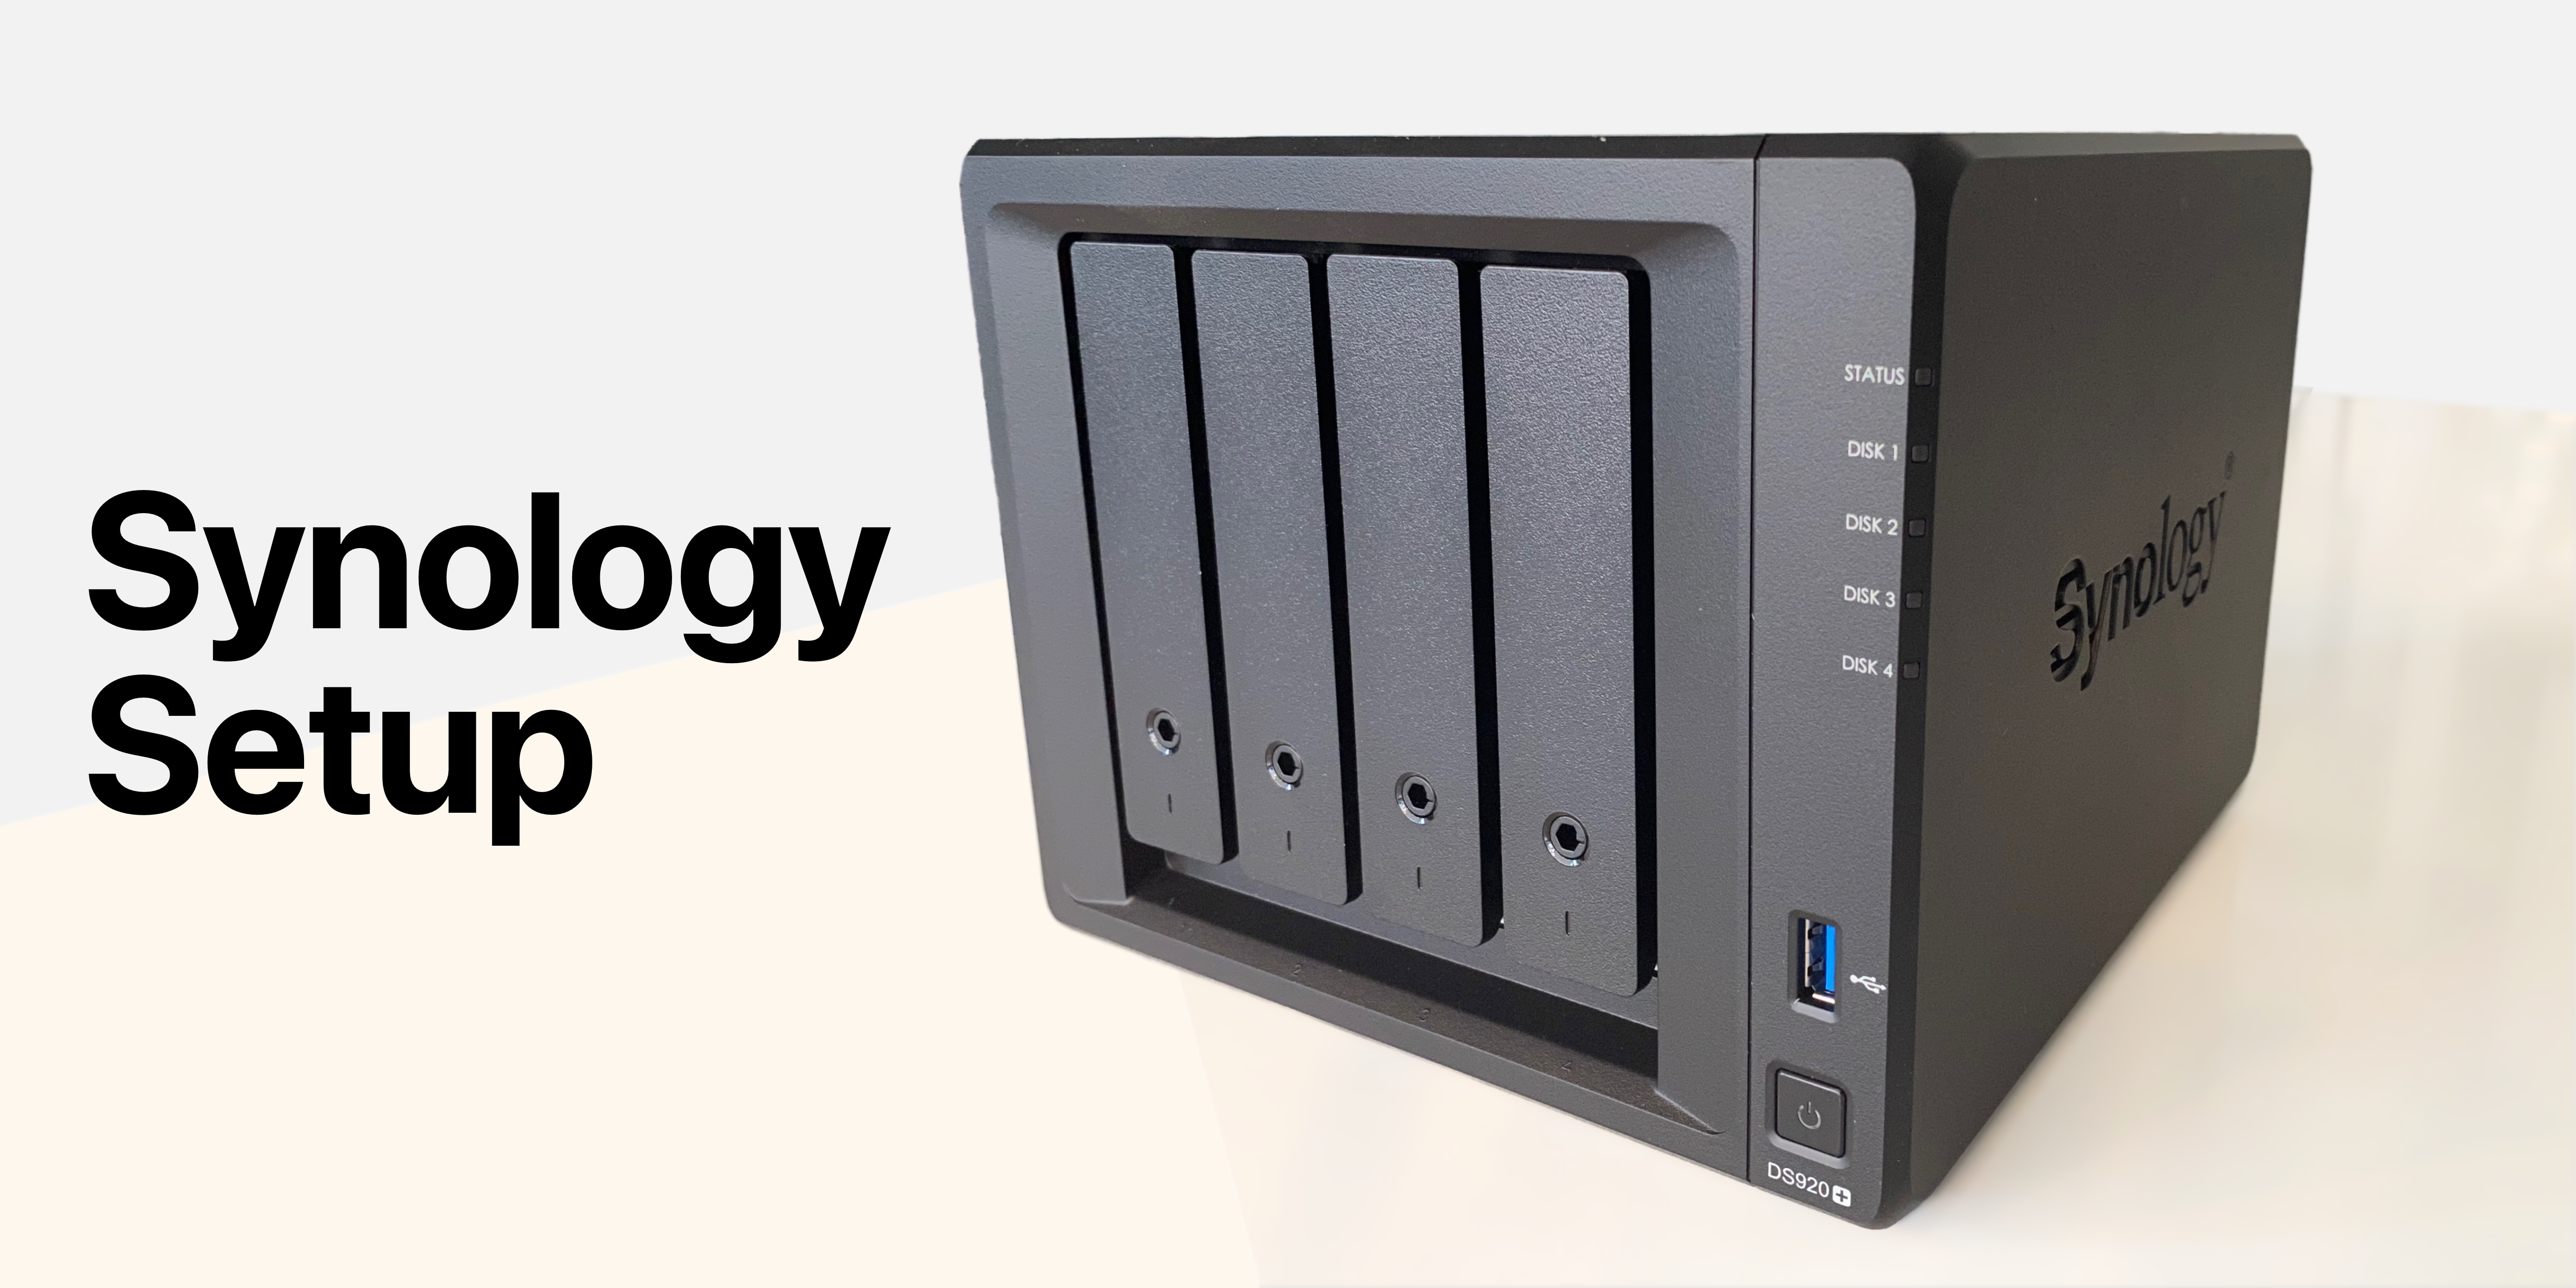 How to copy data from old Synology NAS to new Synology NAS